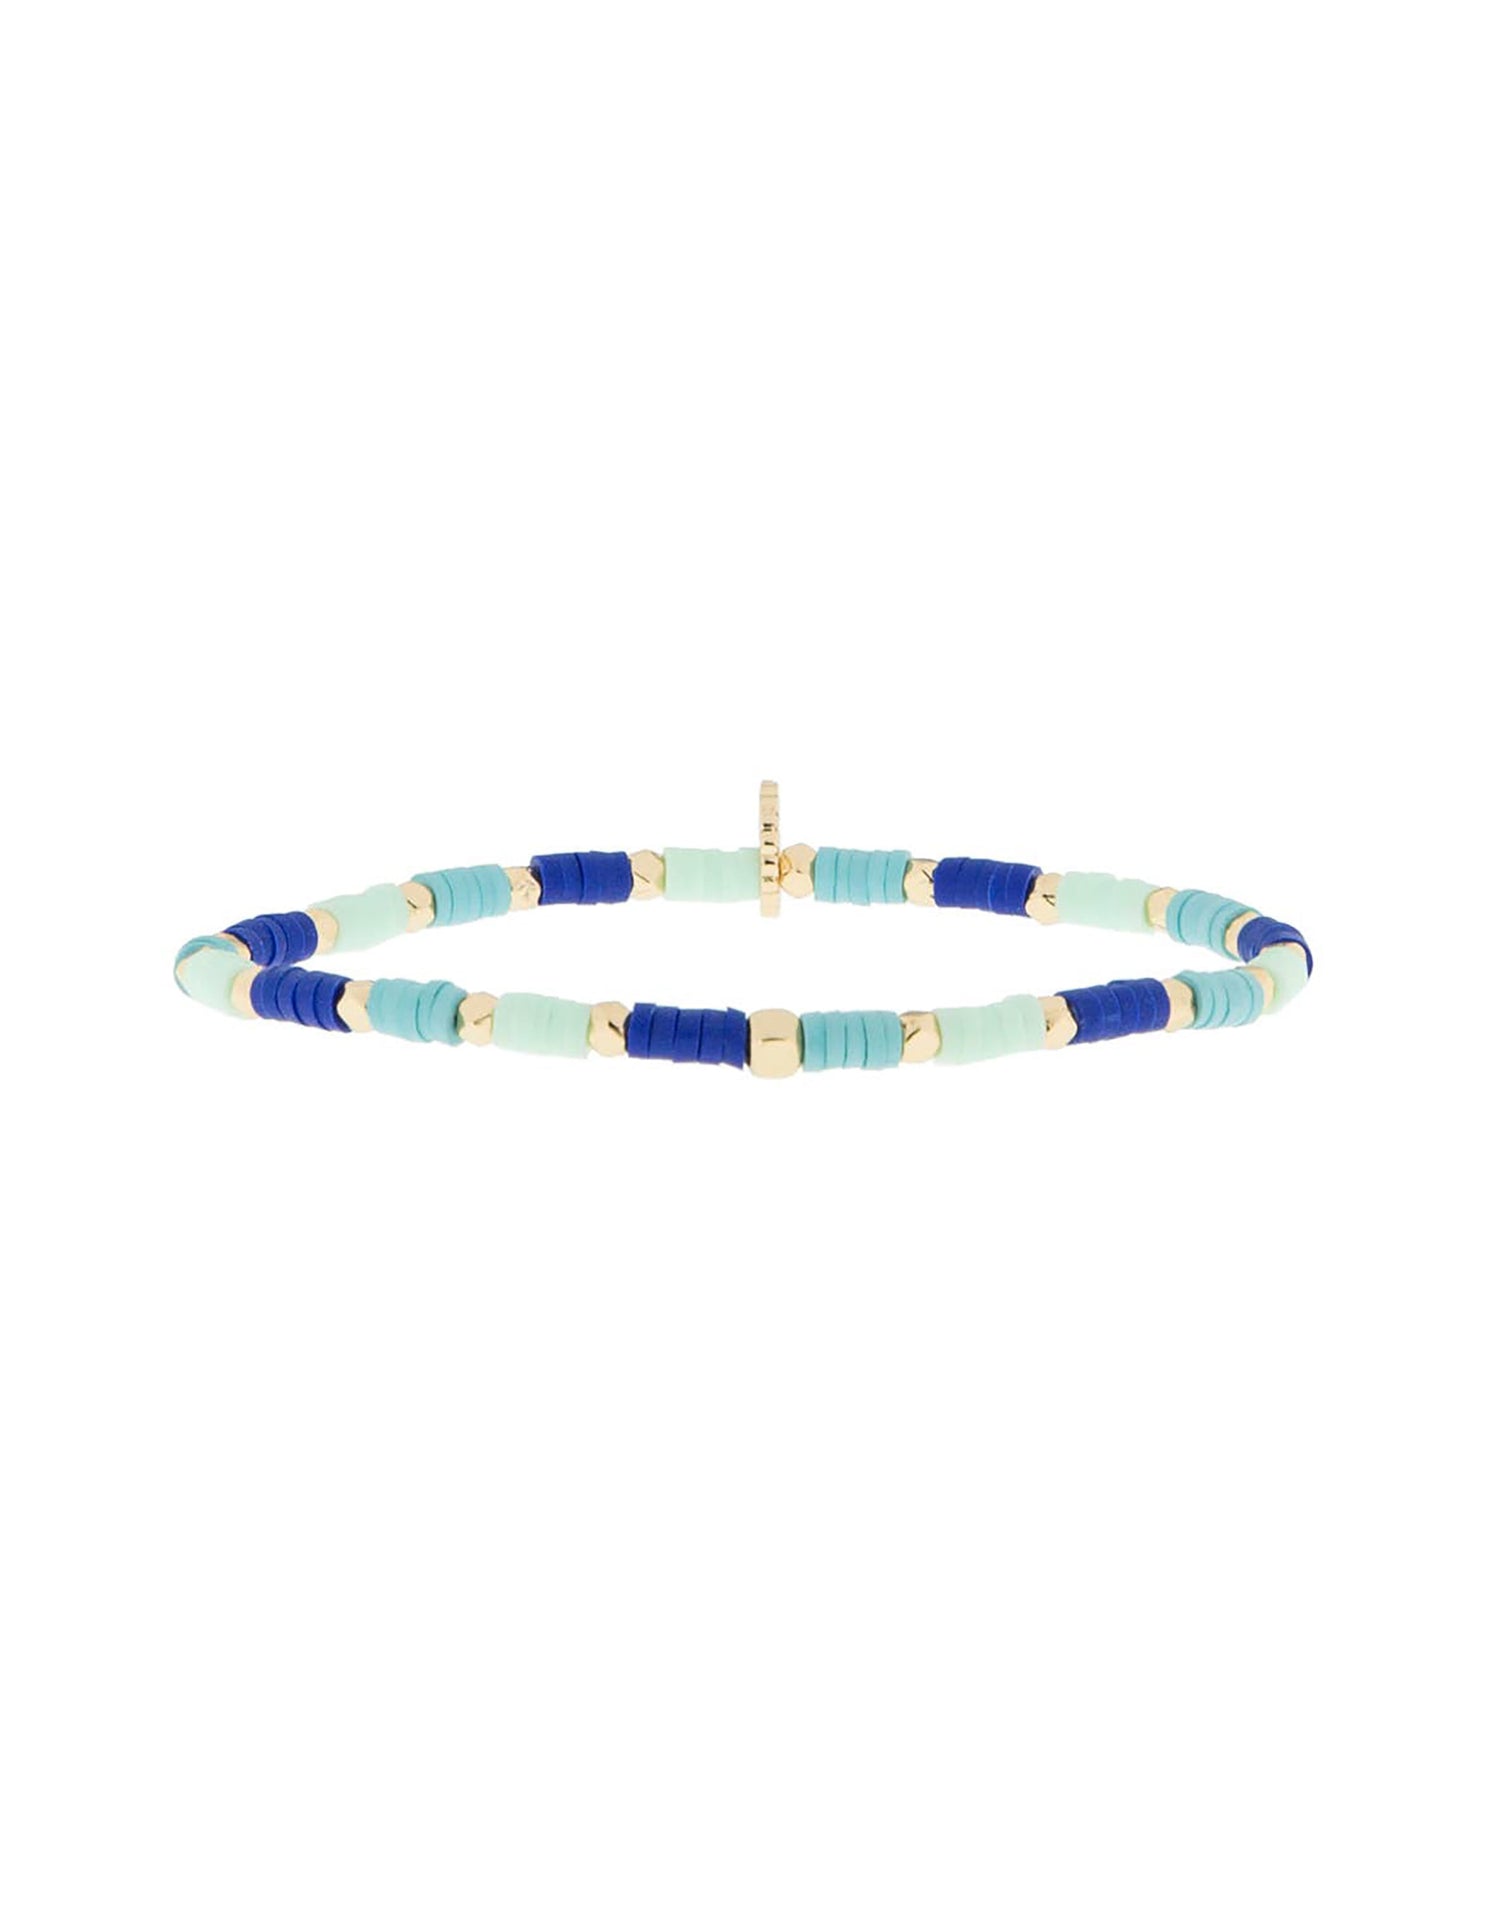 Mini Heishi Stretch Bracelet by Marlyn Schiff in Turquoise - Product View